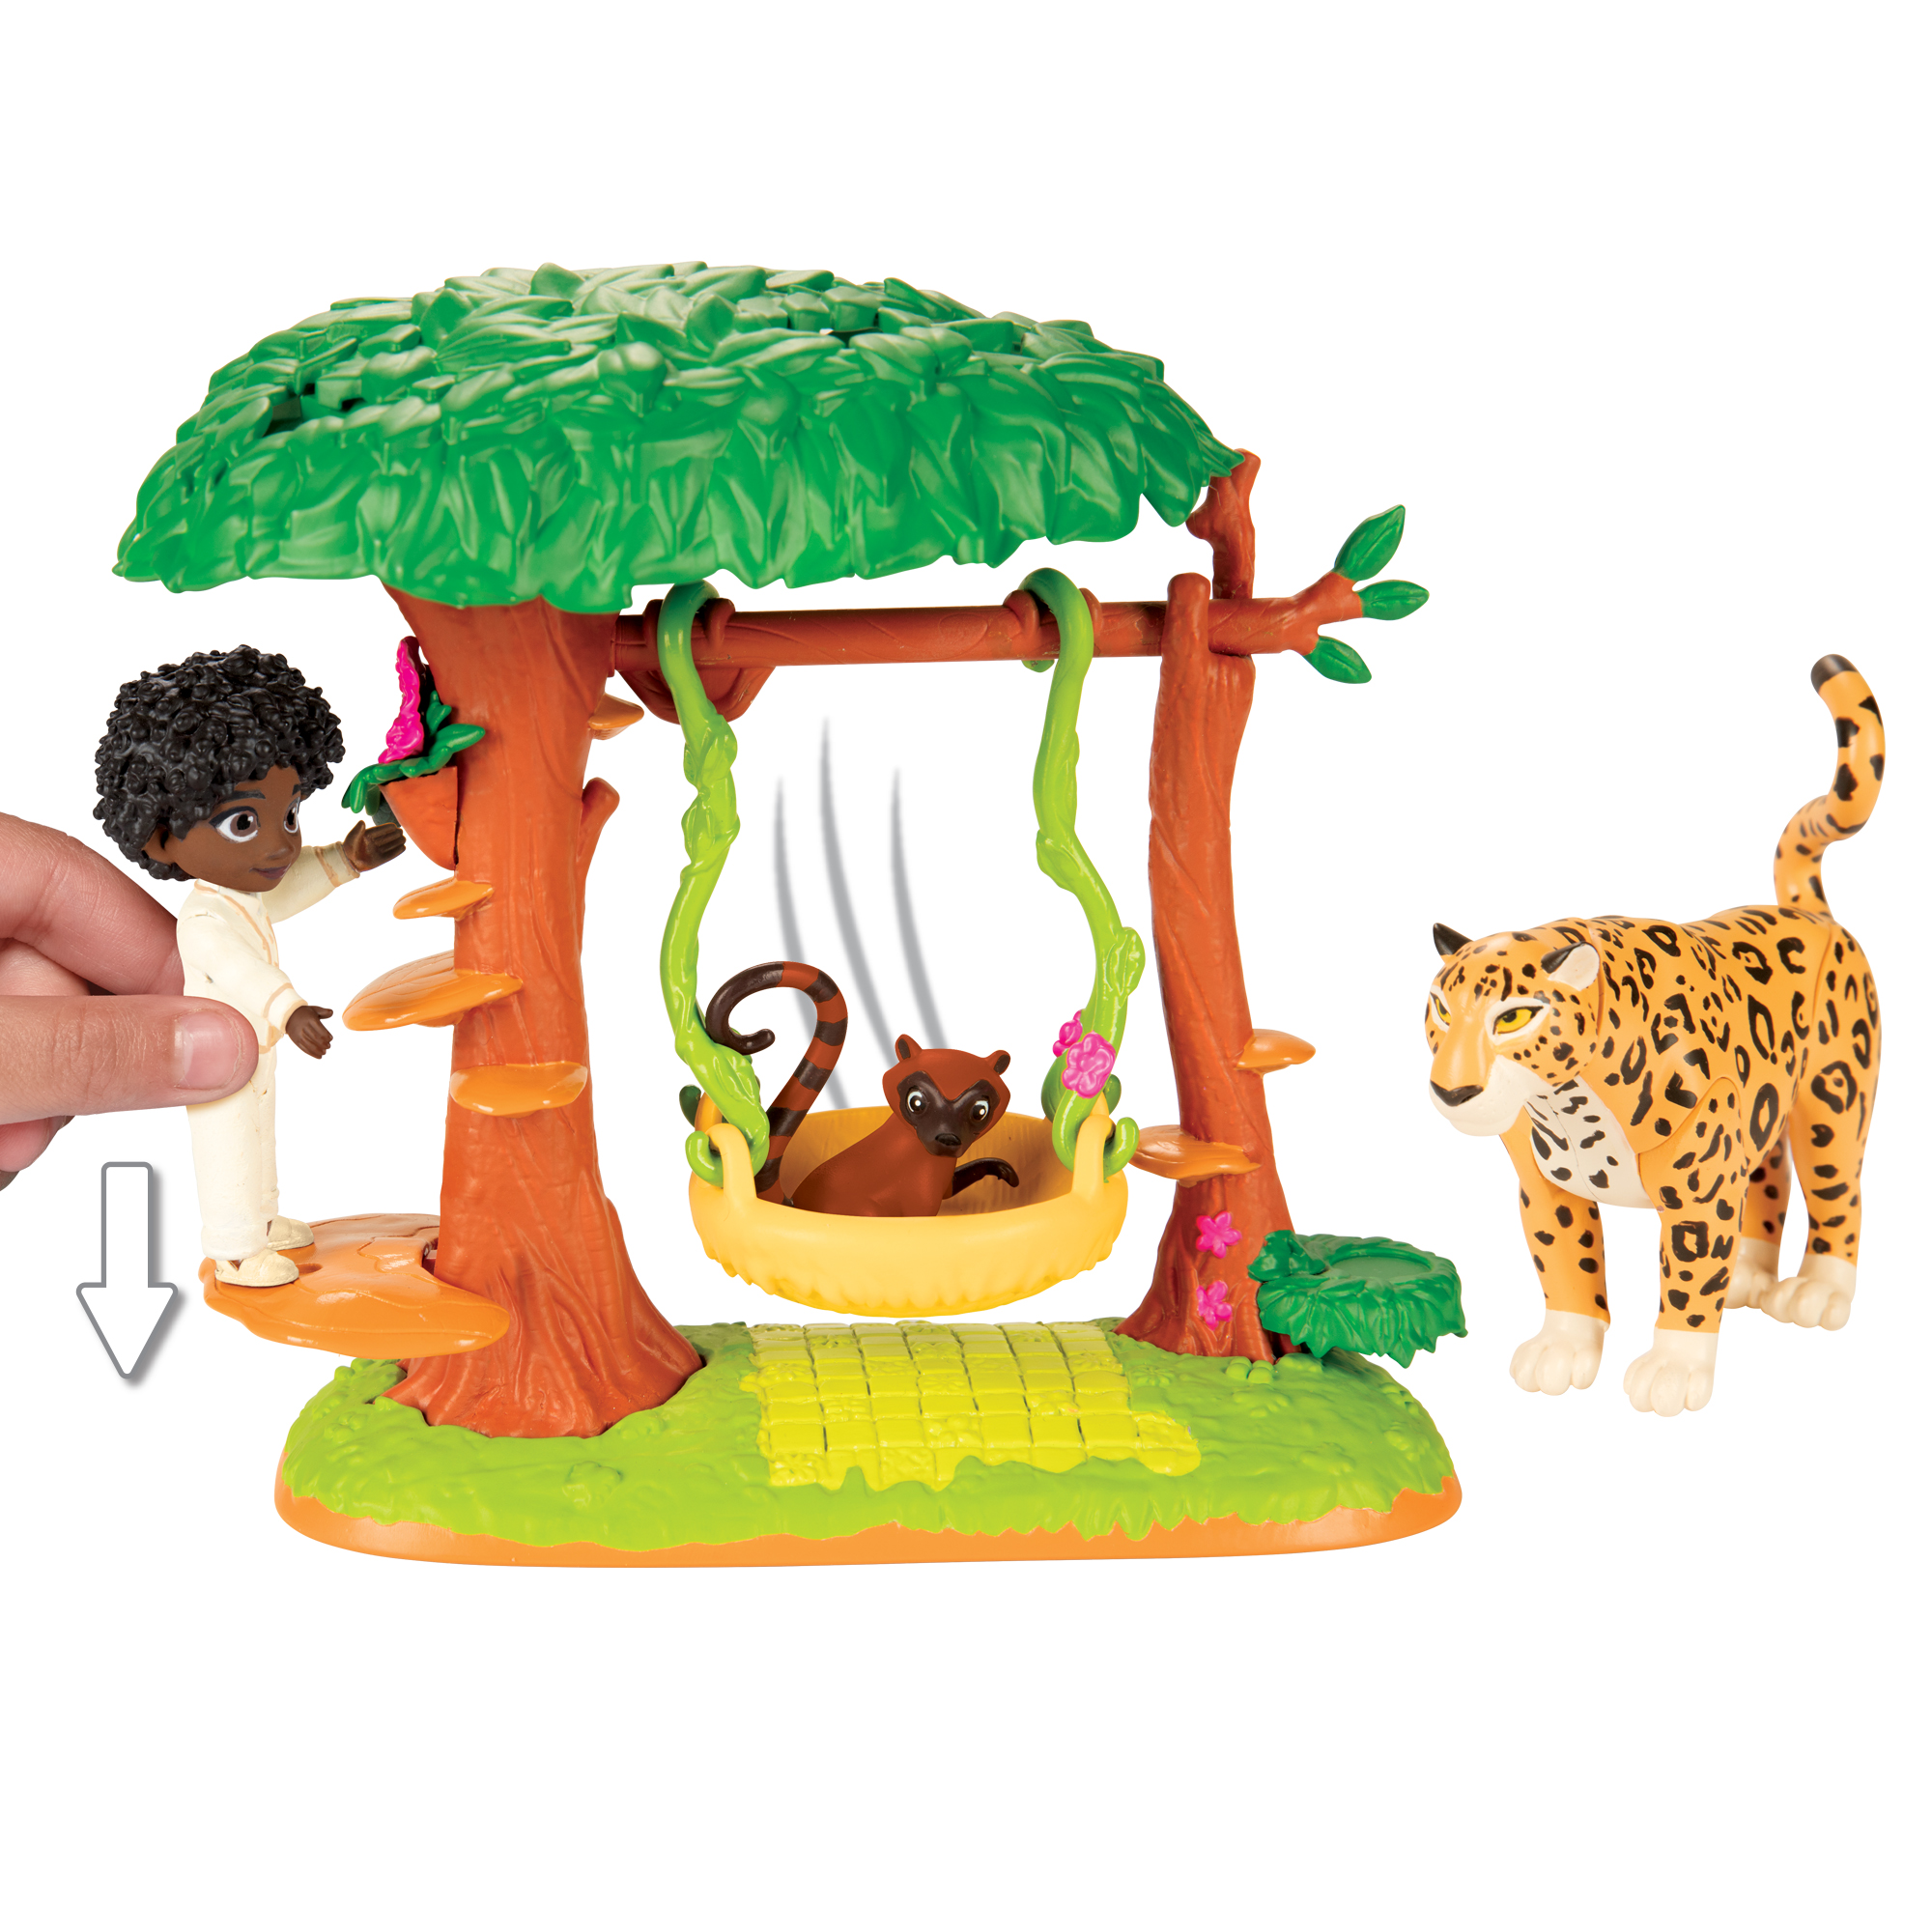 Disney Encanto Antonio's Step & Swing Small Doll Playset, Includes 3 Accessories, for Children Ages 3+ - image 3 of 5